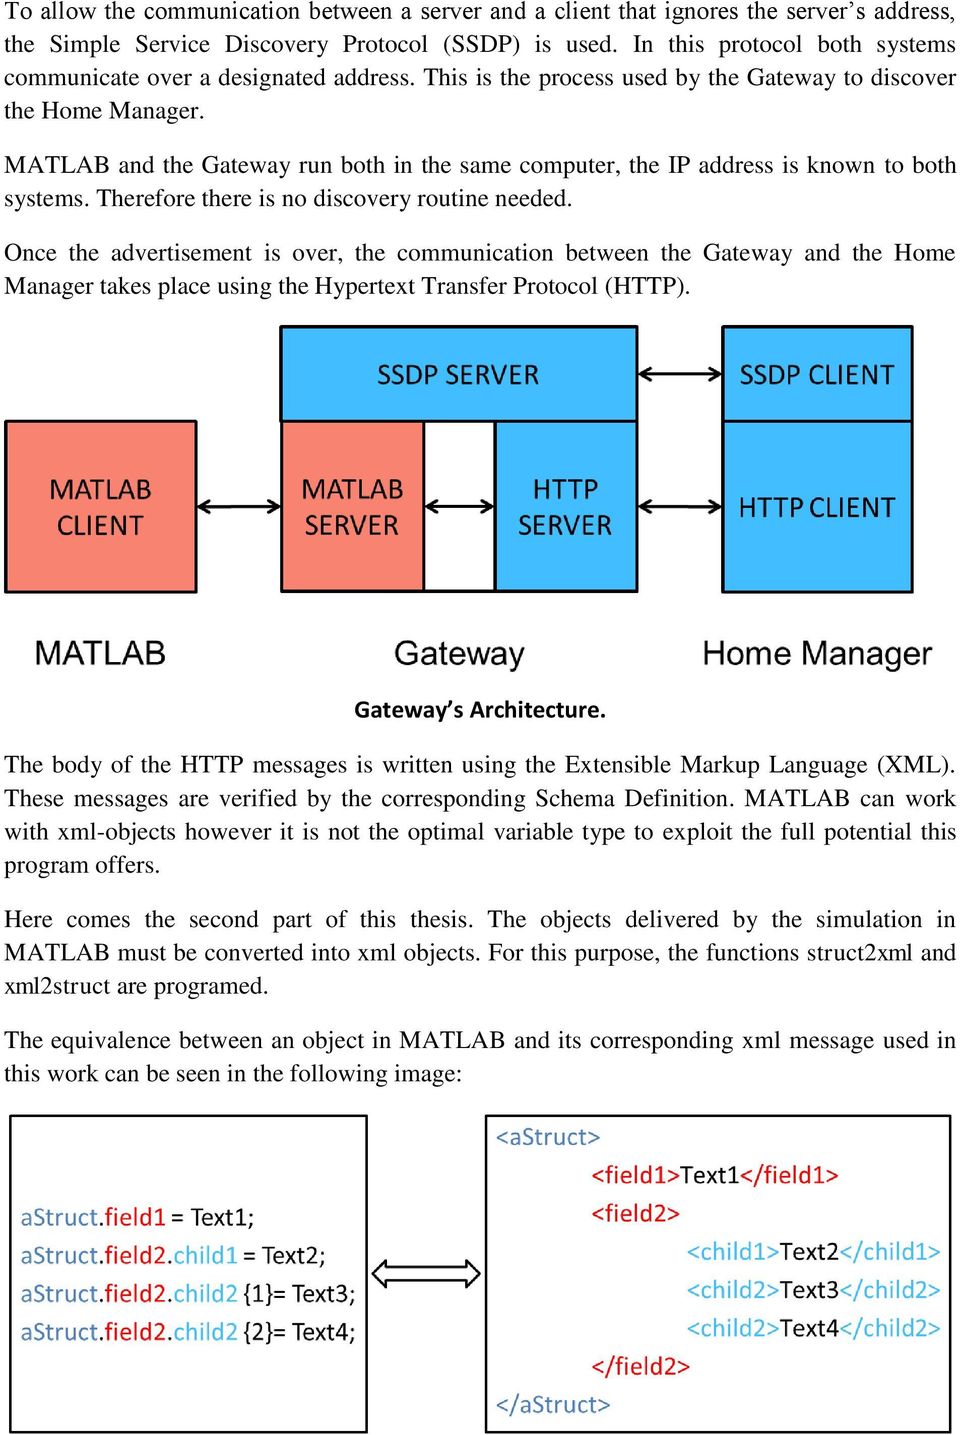 MATLAB and the Gateway run both in the same computer, the IP address is known to both systems. Therefore there is no discovery routine needed.